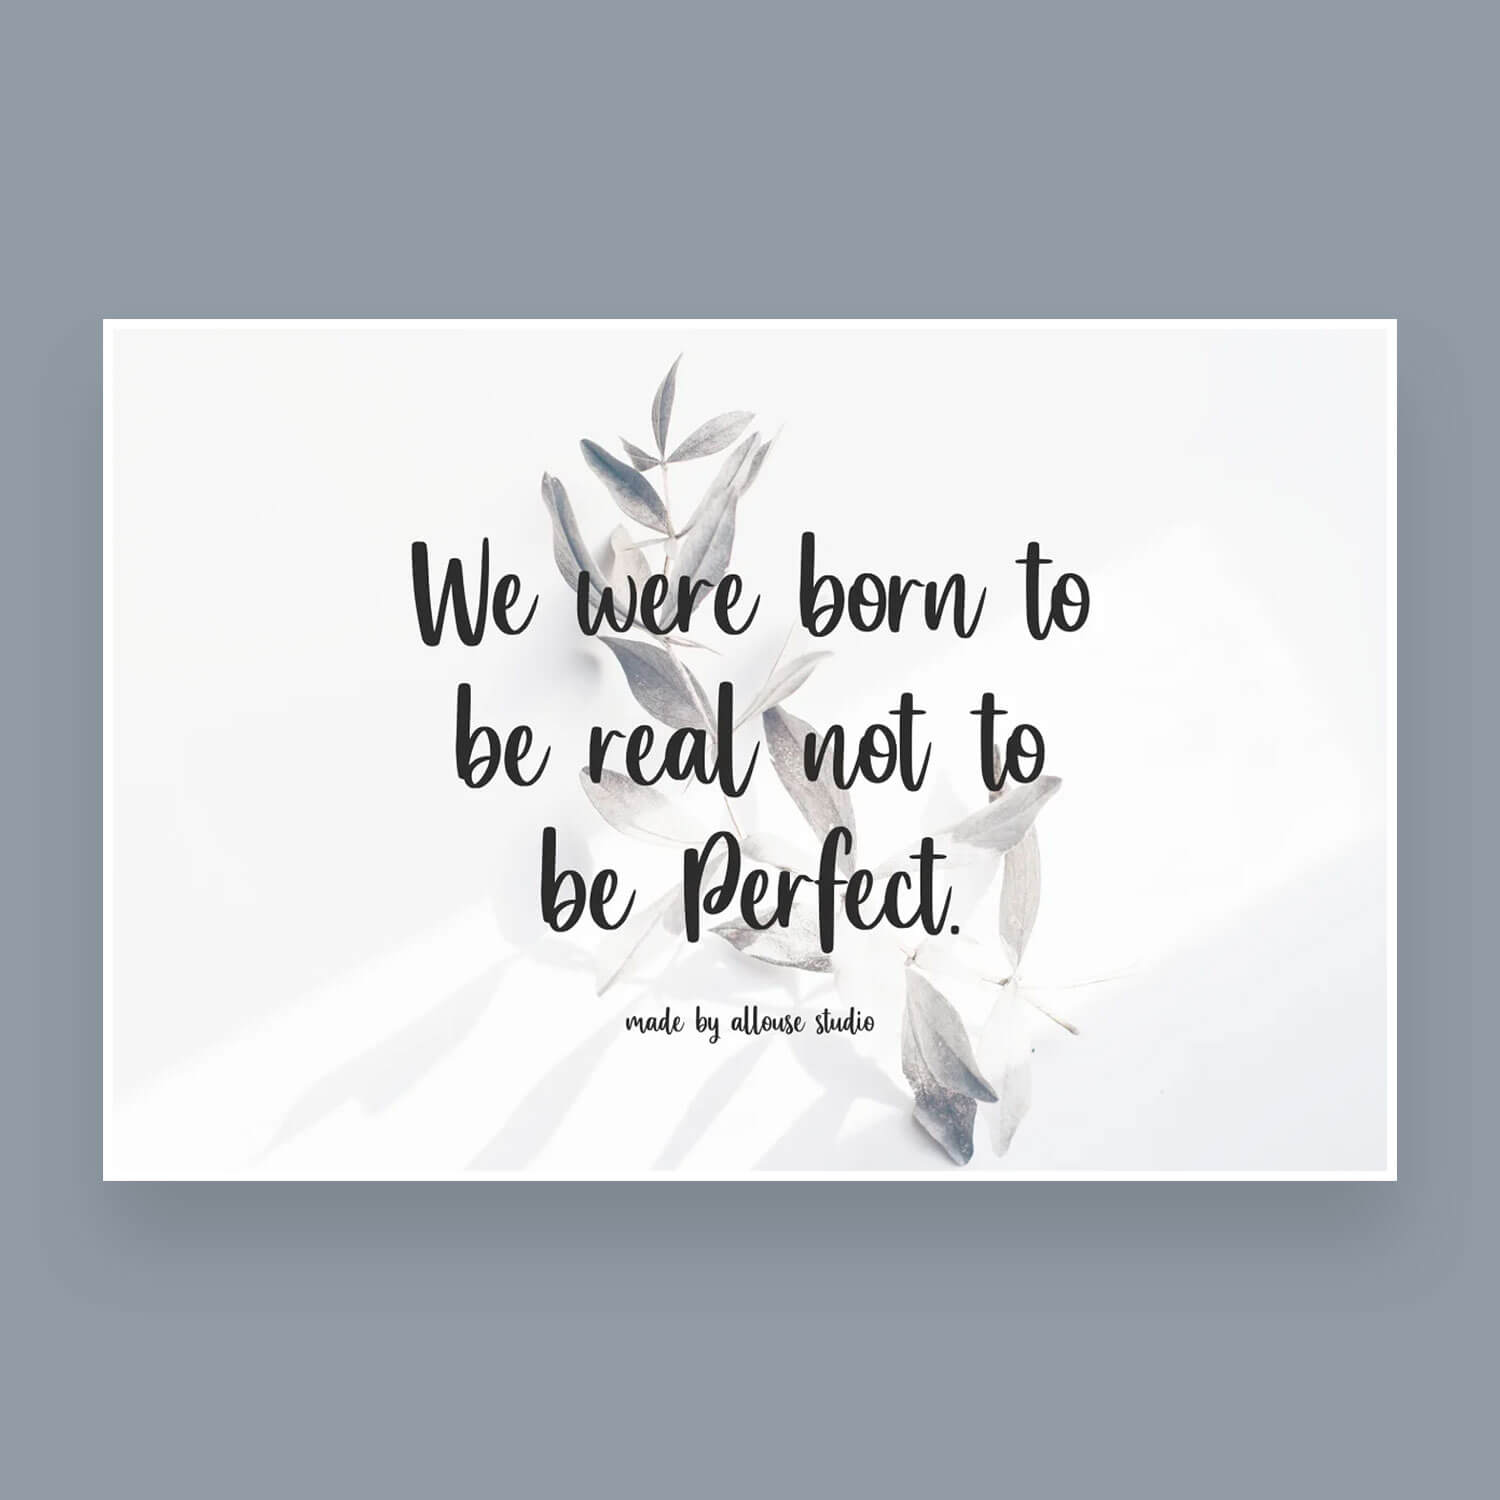 Inscription: We were born to be real not to be Perfect.